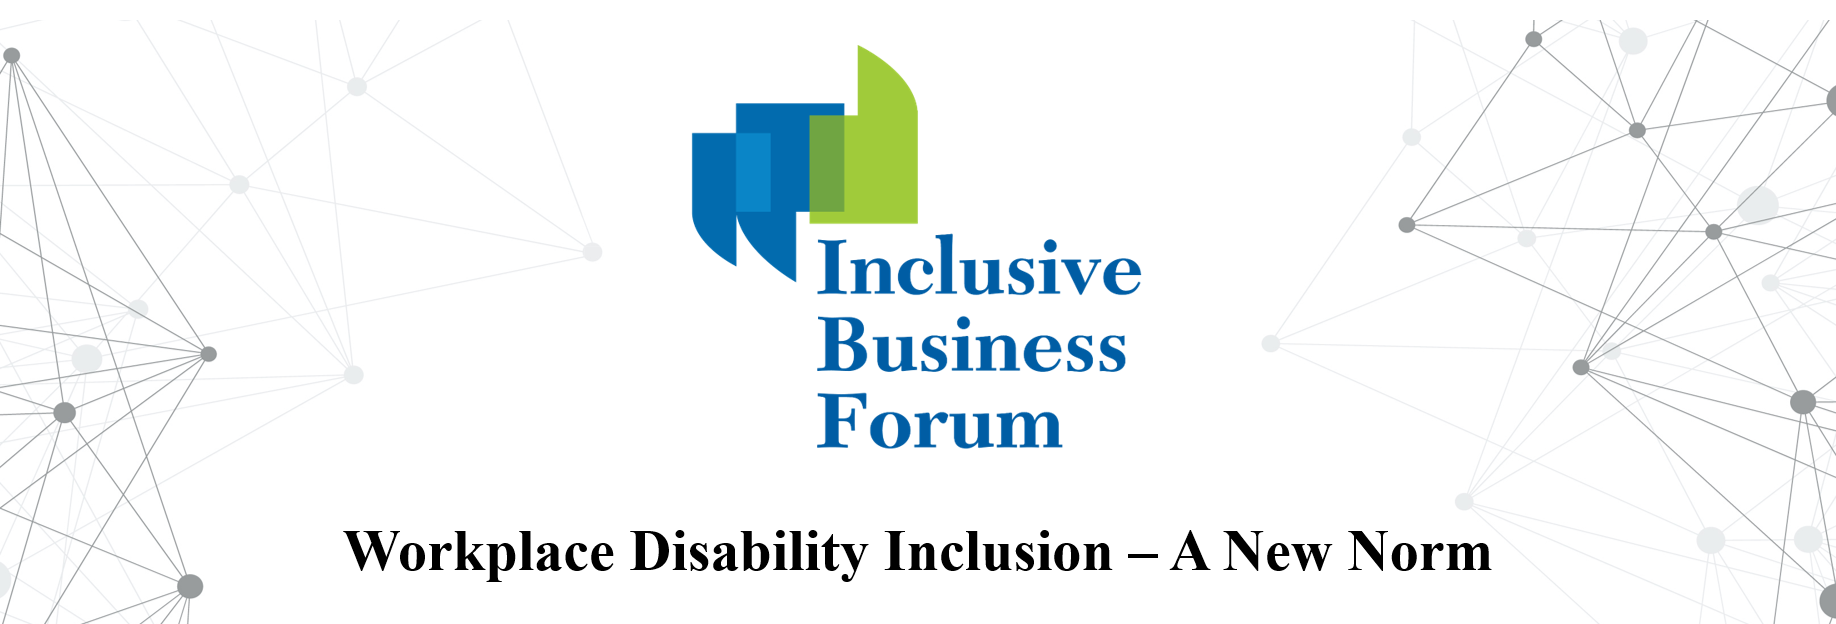 Inclusive Business Forum 2020 key visual, with the text "Workplace Disability Inclusion - A New Norm".